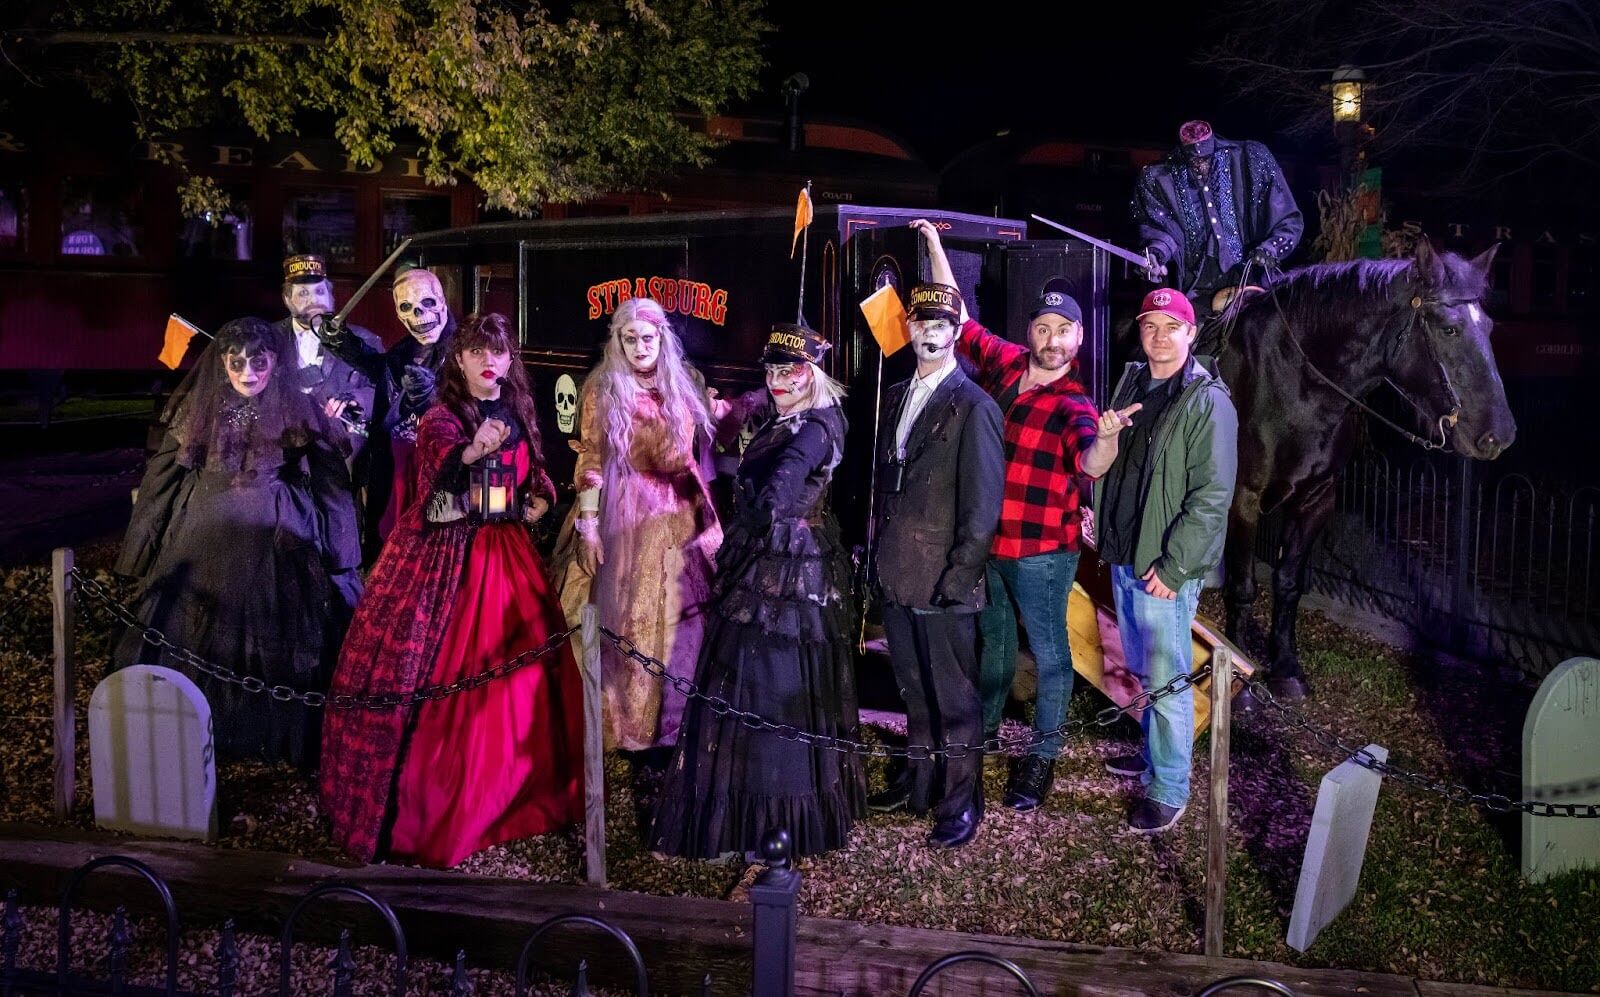 The cast of sleepy hollow dressed in spooky costumes posing for the camera next to a spooky horse and carriage.